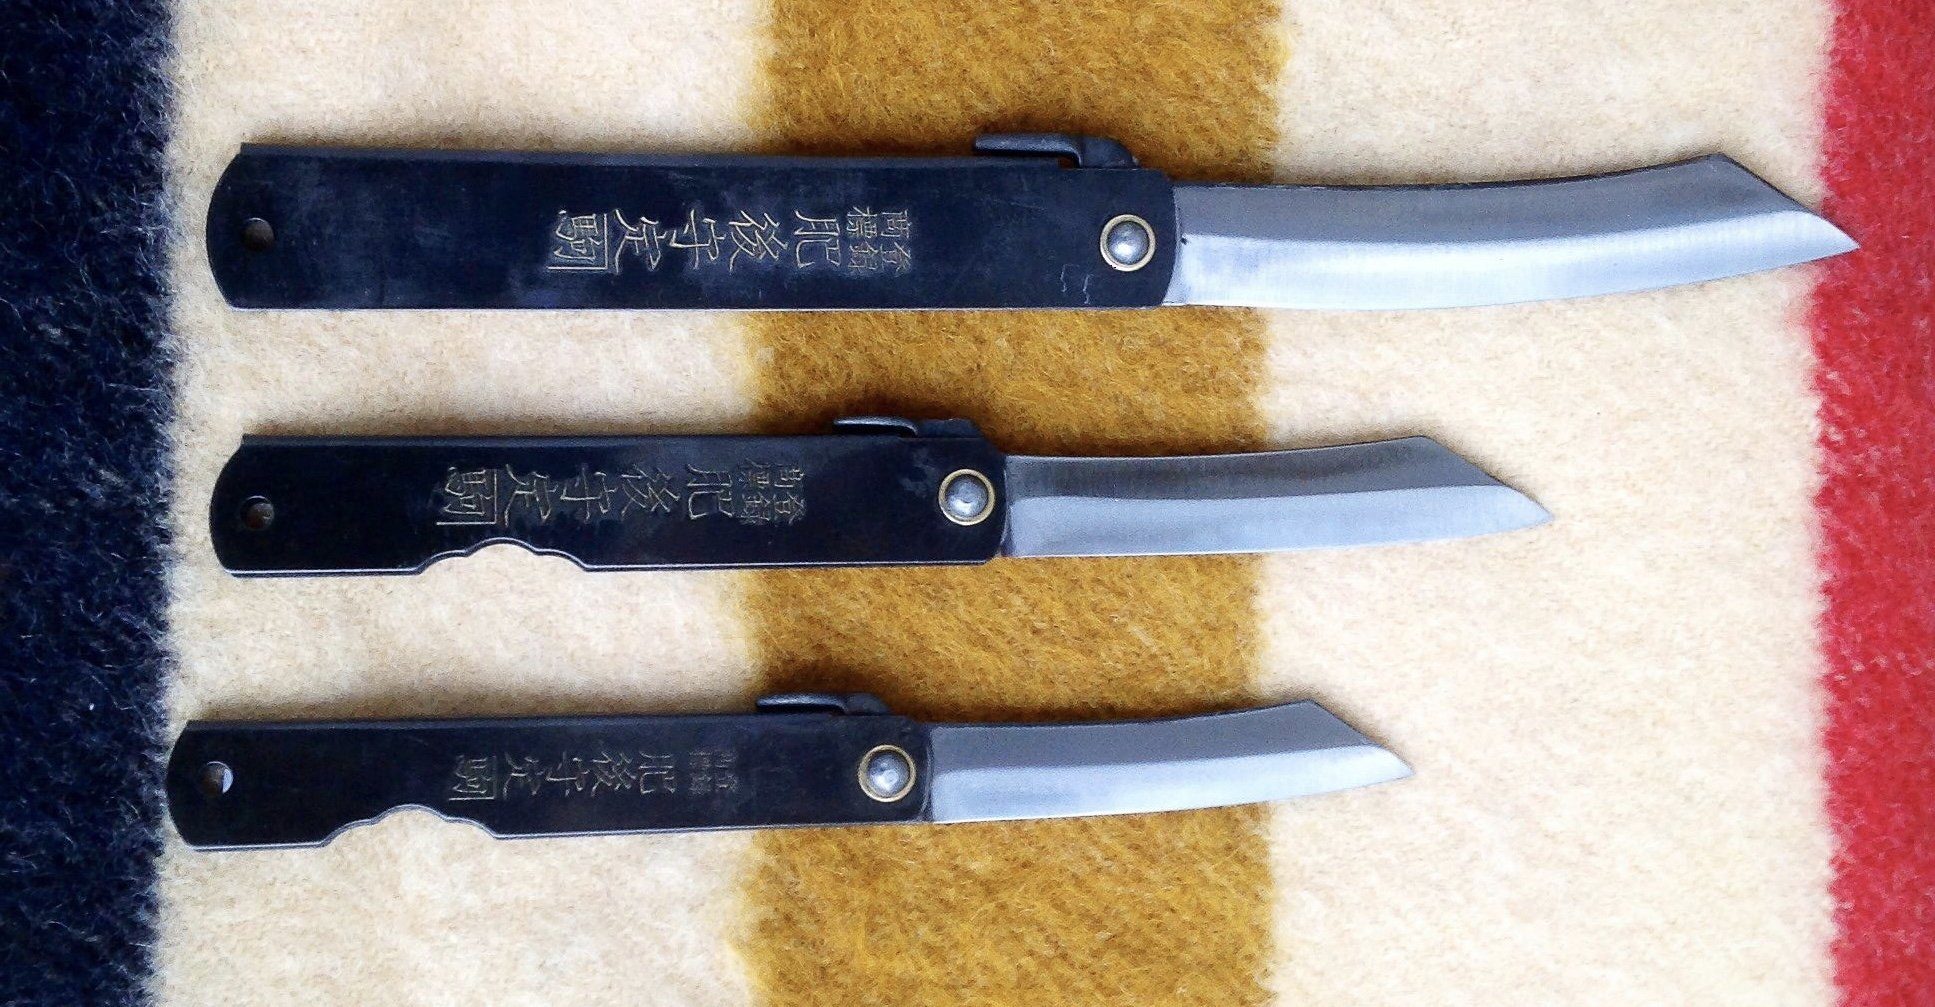 The Higo no kami: The Littlest Knife that Could